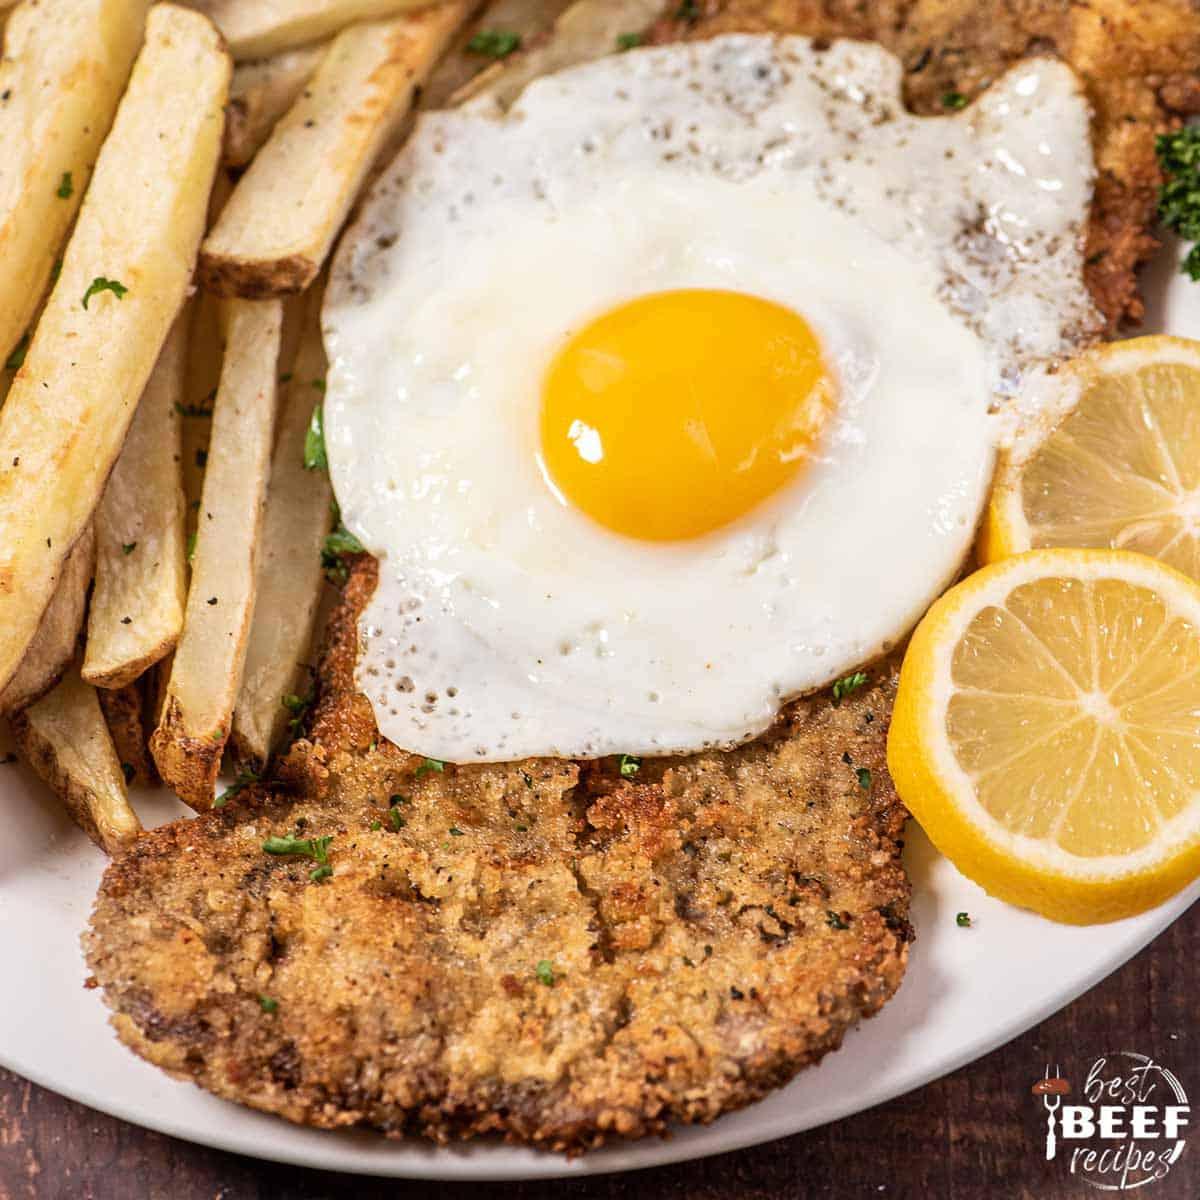 steak milanesa on a plate with an egg and fries